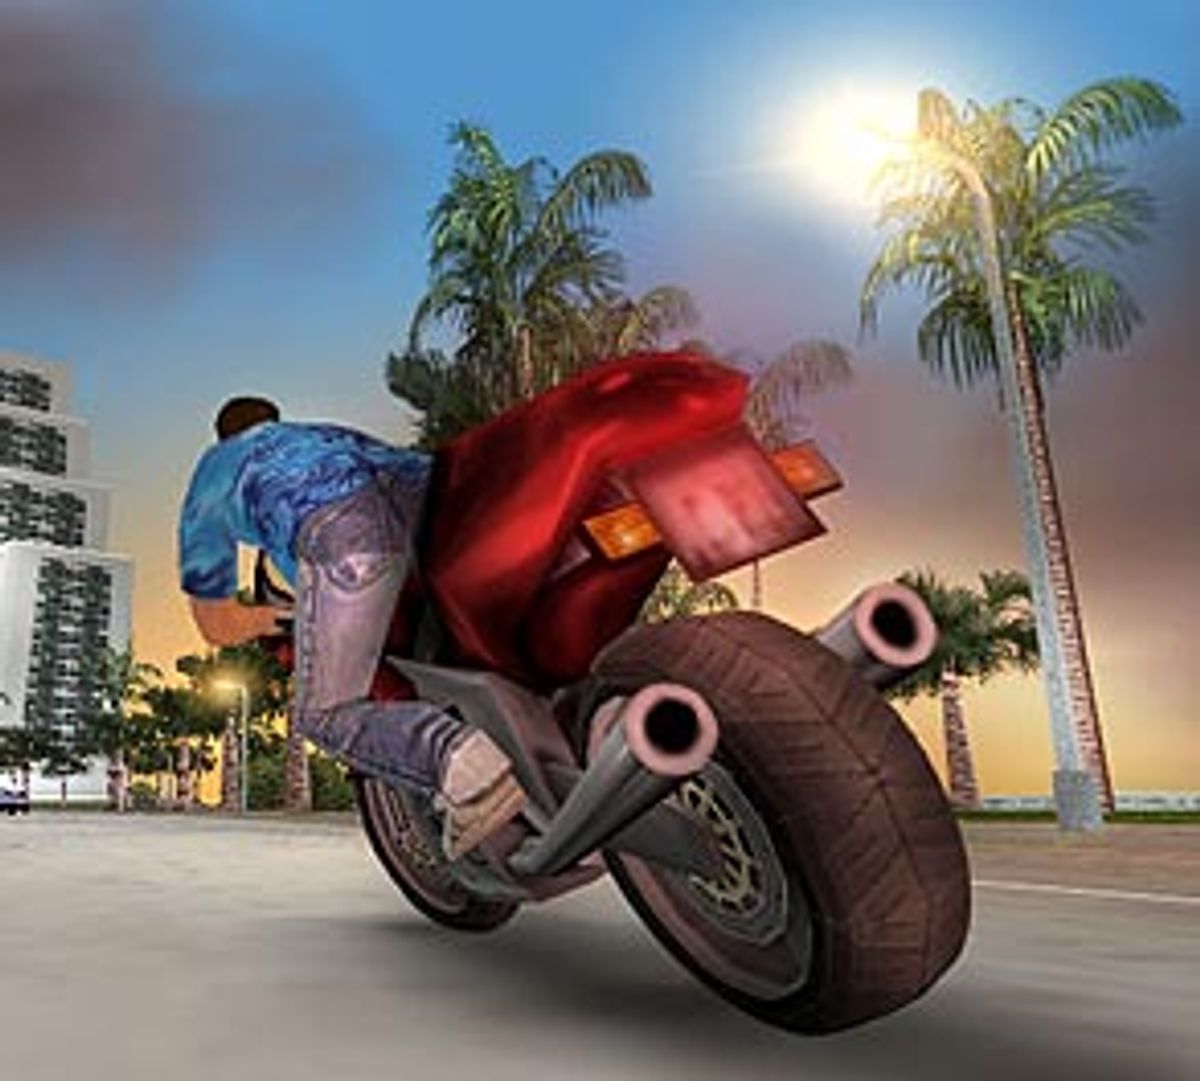 What Made Grand Theft Auto: Vice City So Special